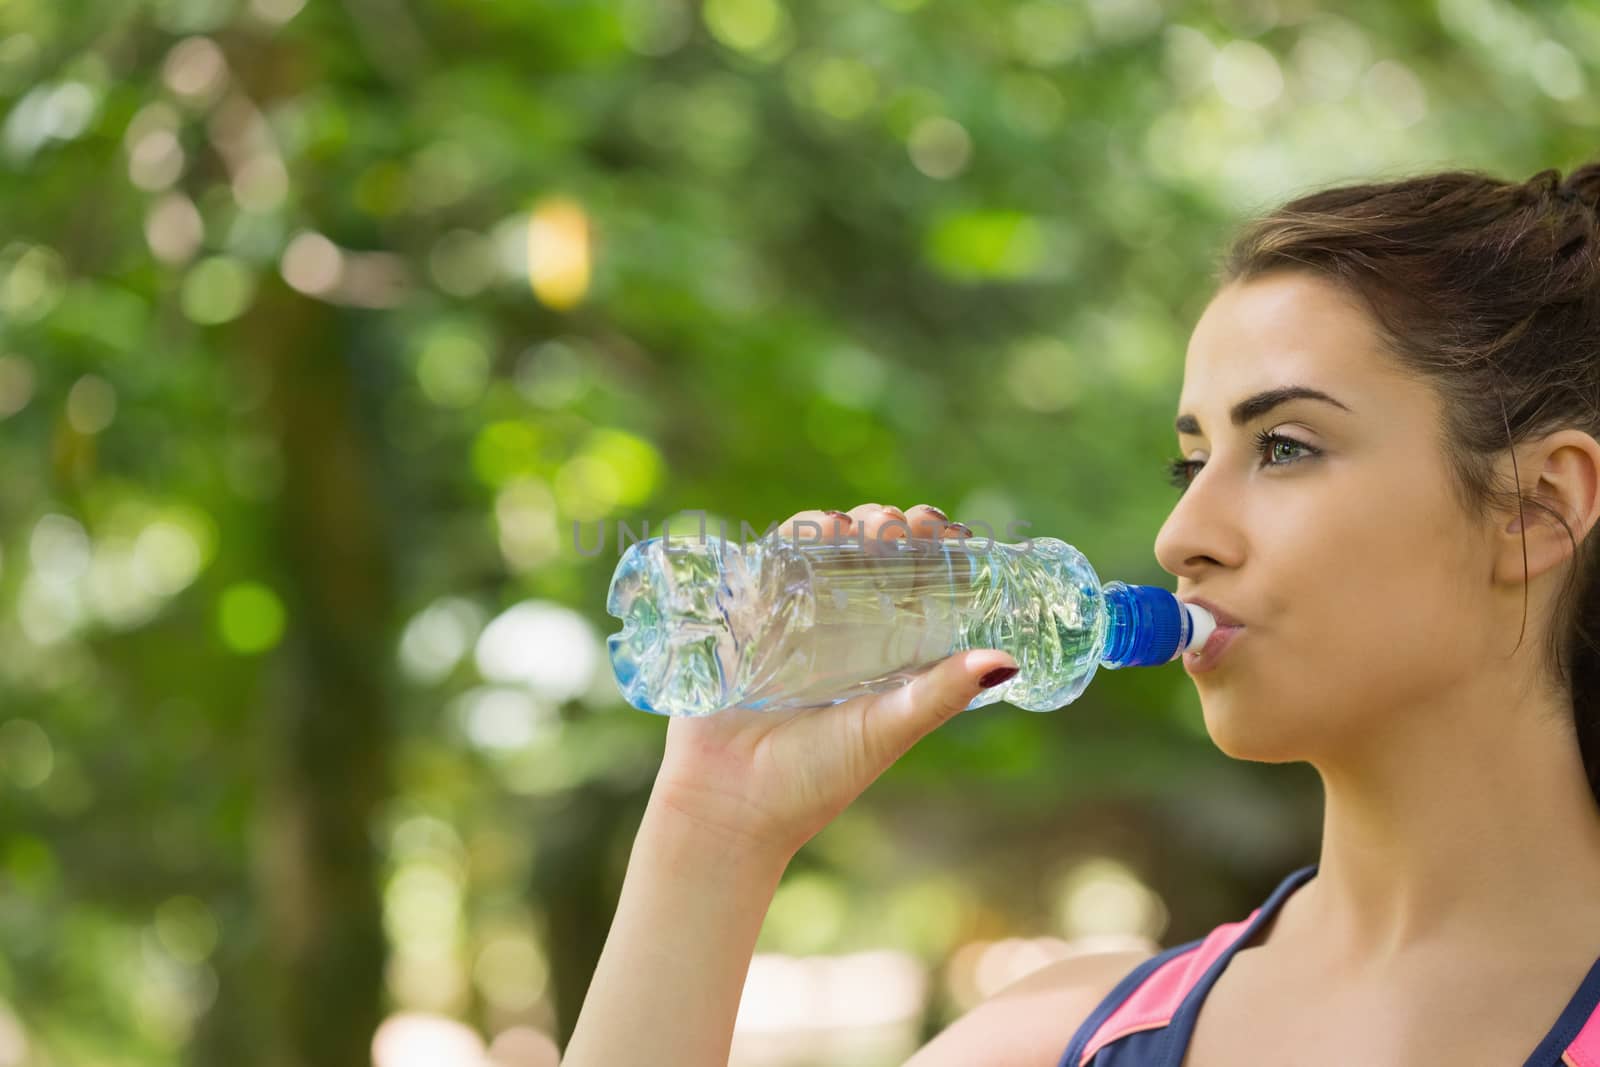 Sporty woman drinking water outdoors in a forest on a sunny day